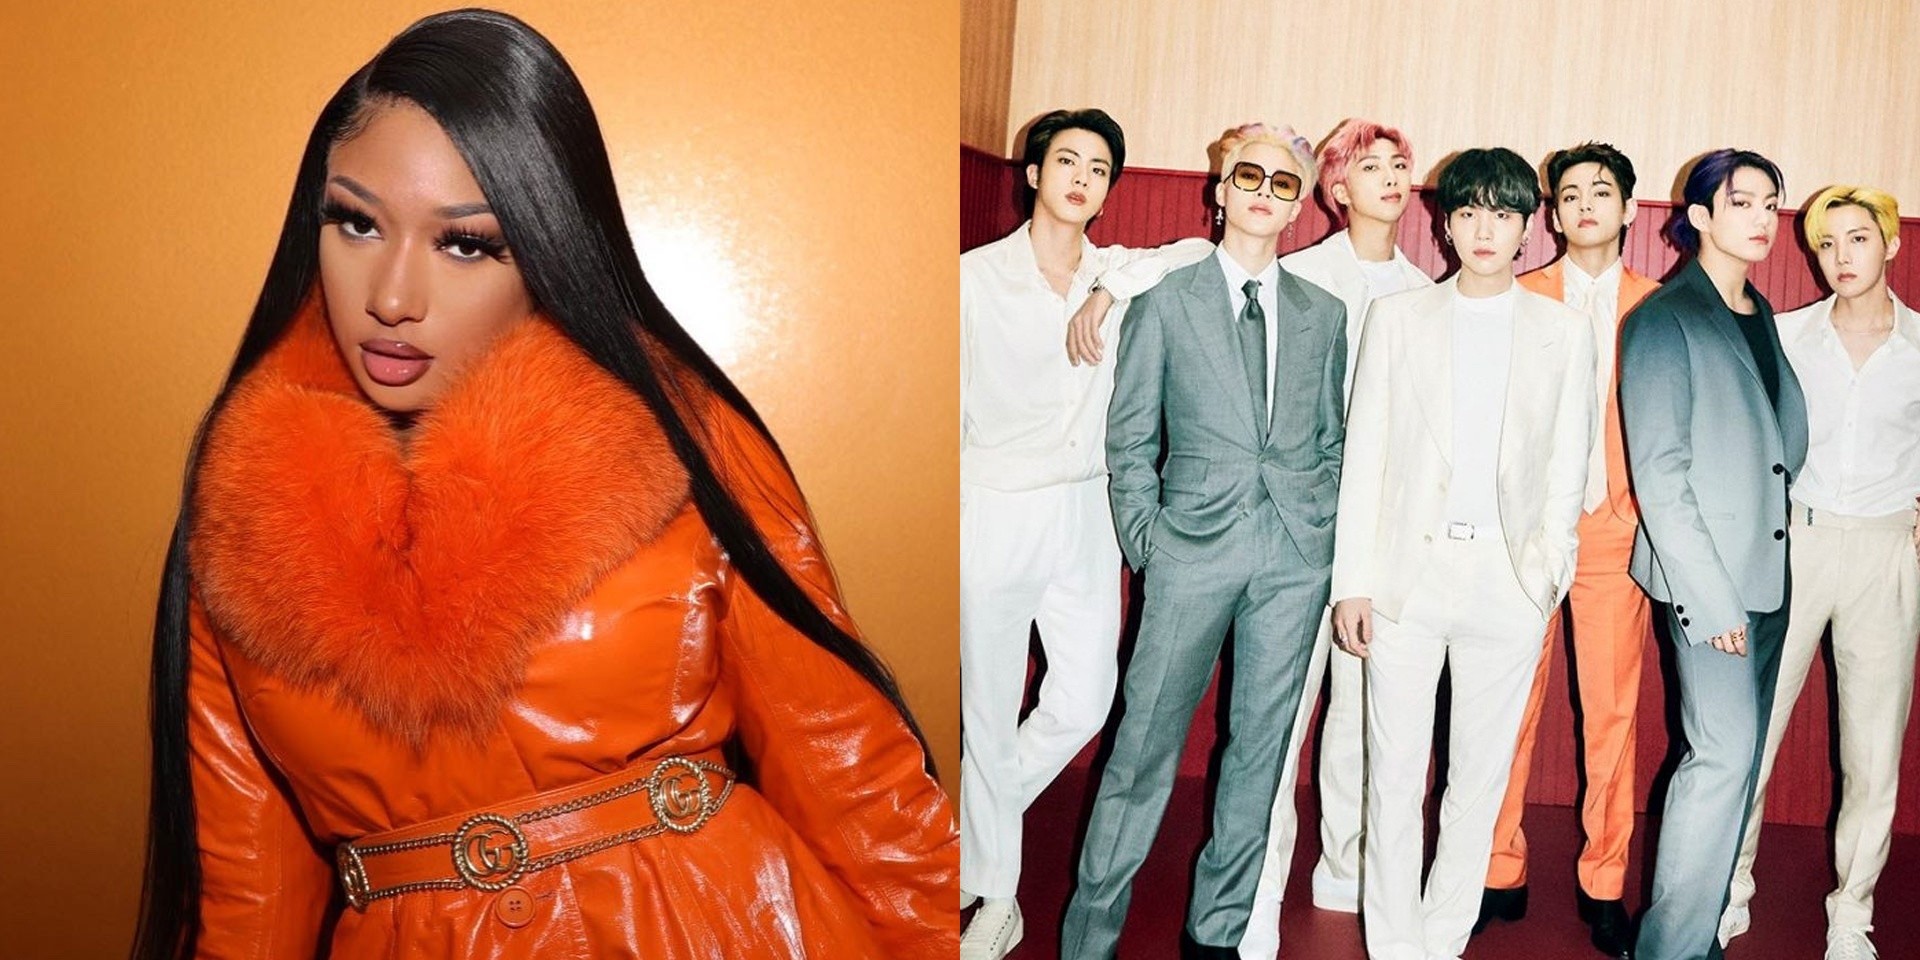 BTS and Megan Thee Stallion are releasing their 'Butter' remix this Friday